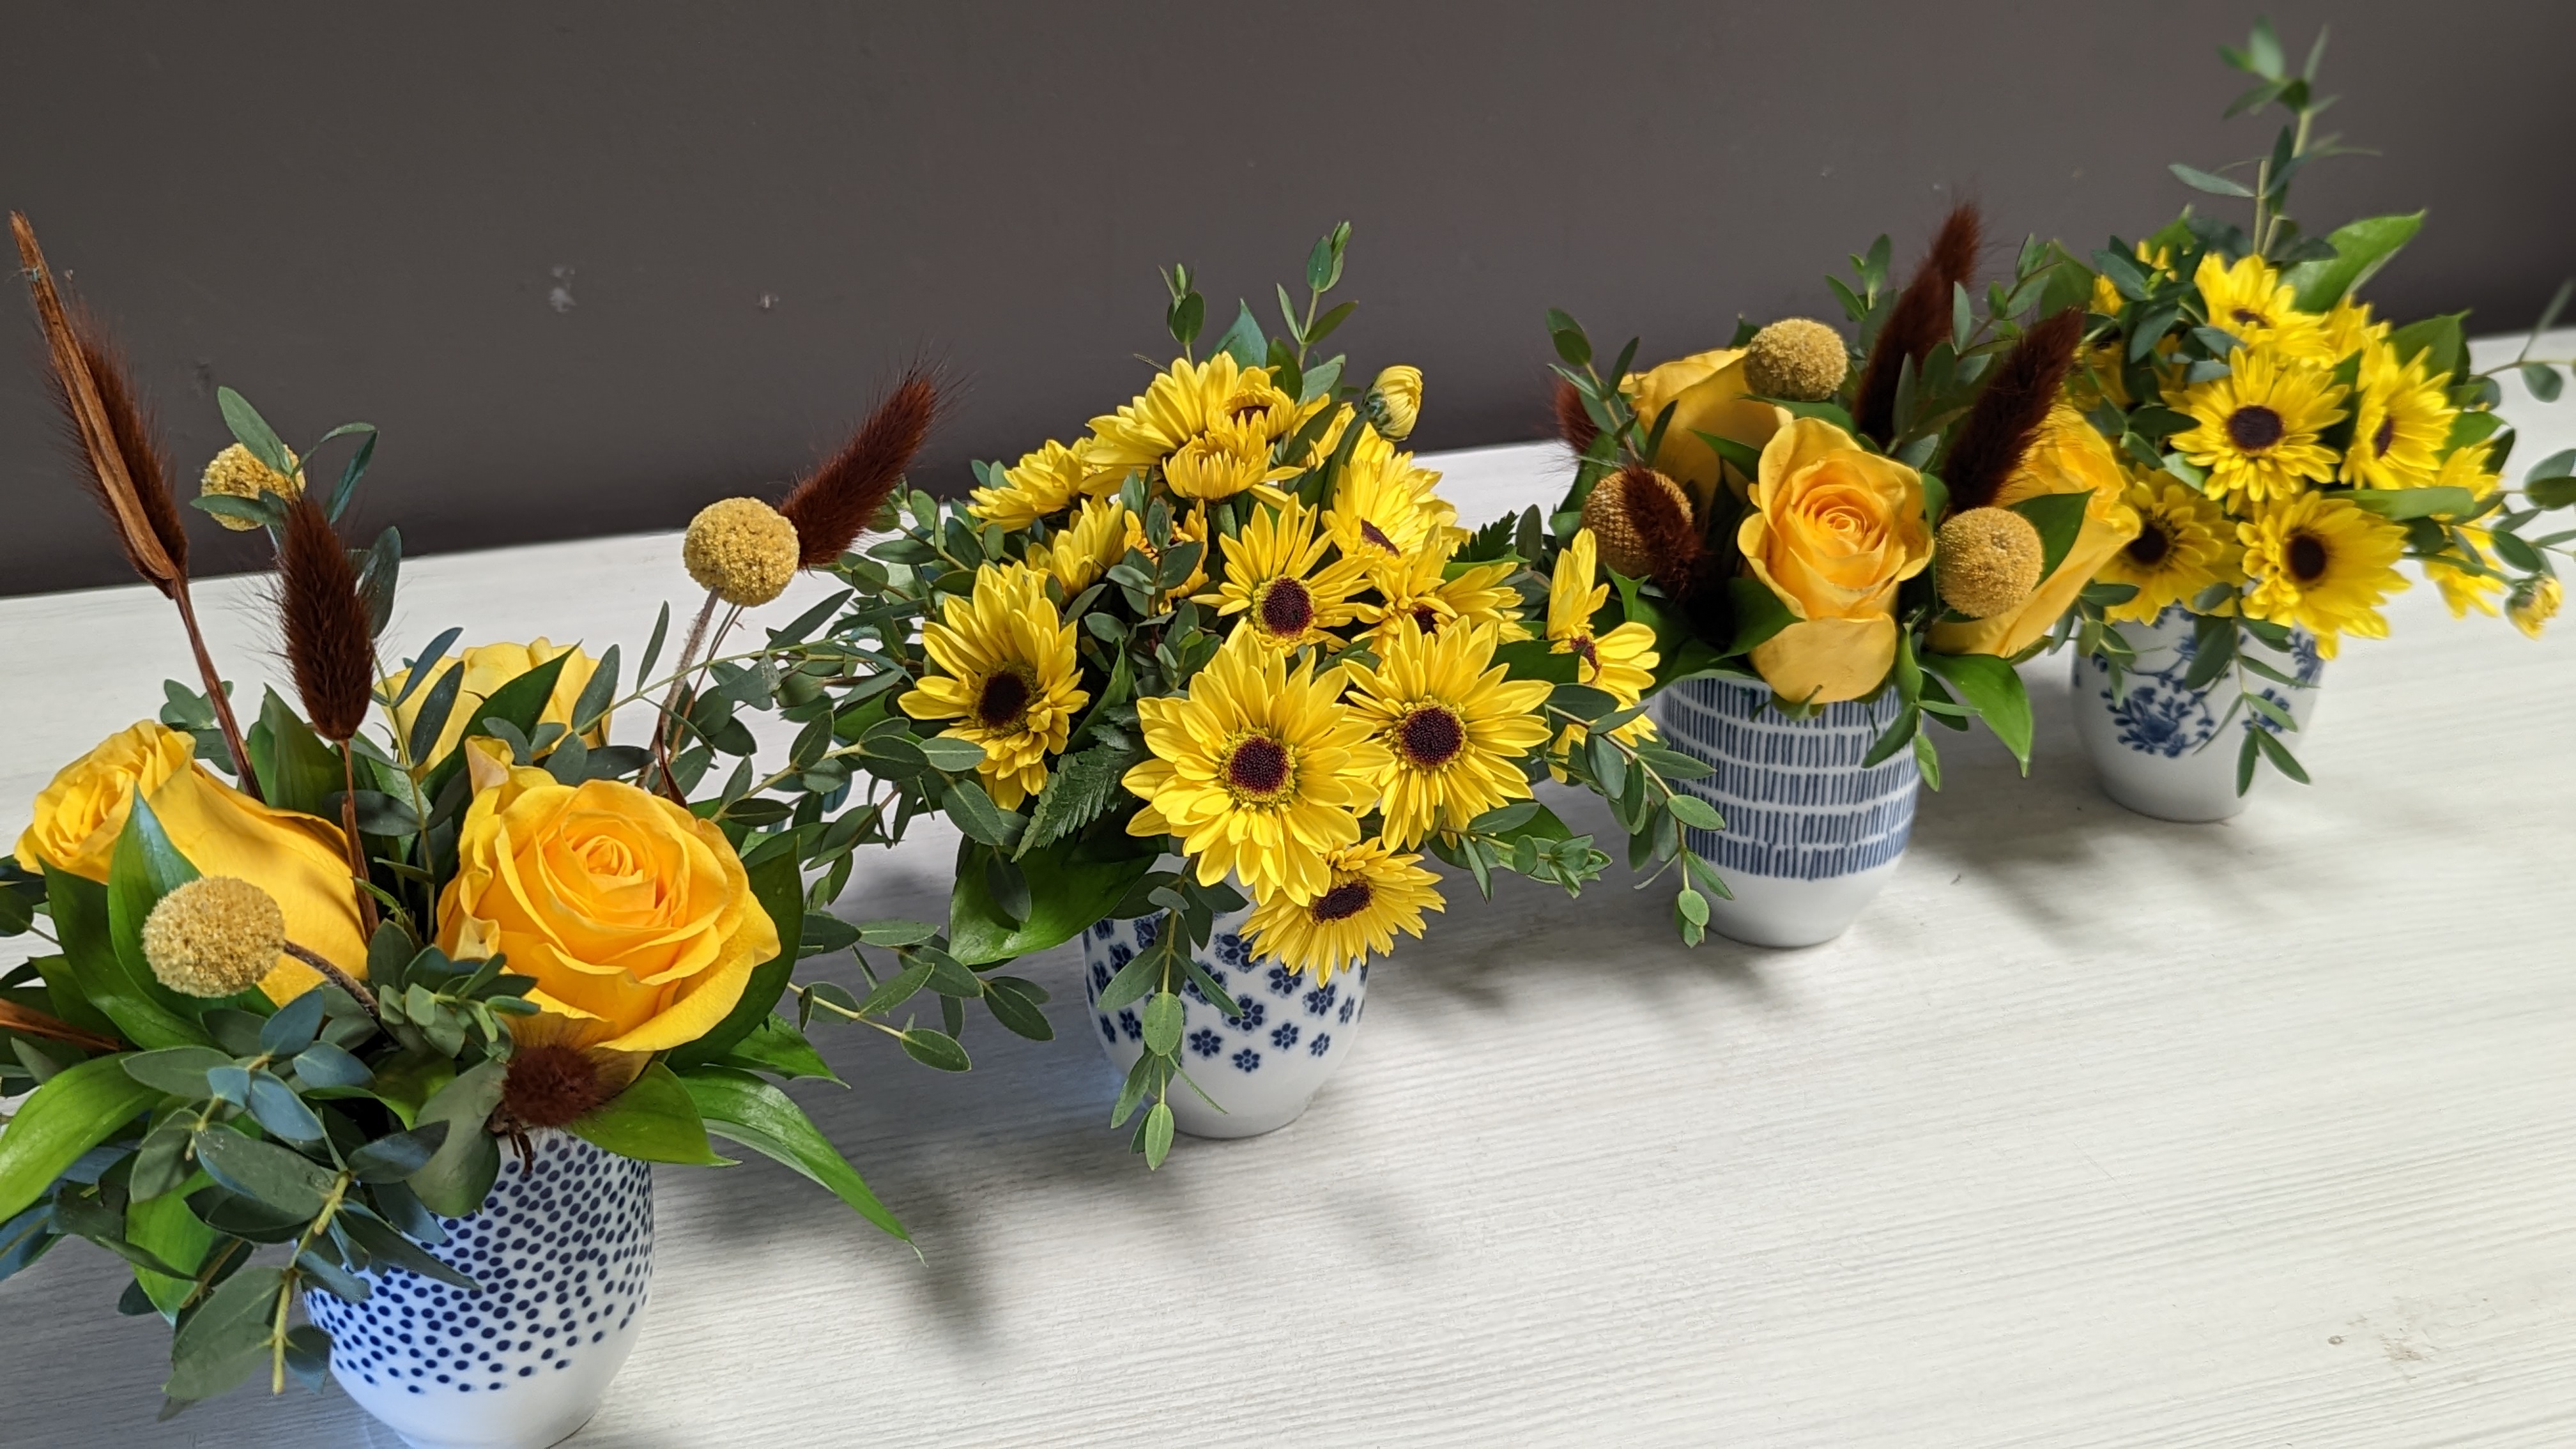 Blue and White Vases with yellow and Brown flowers